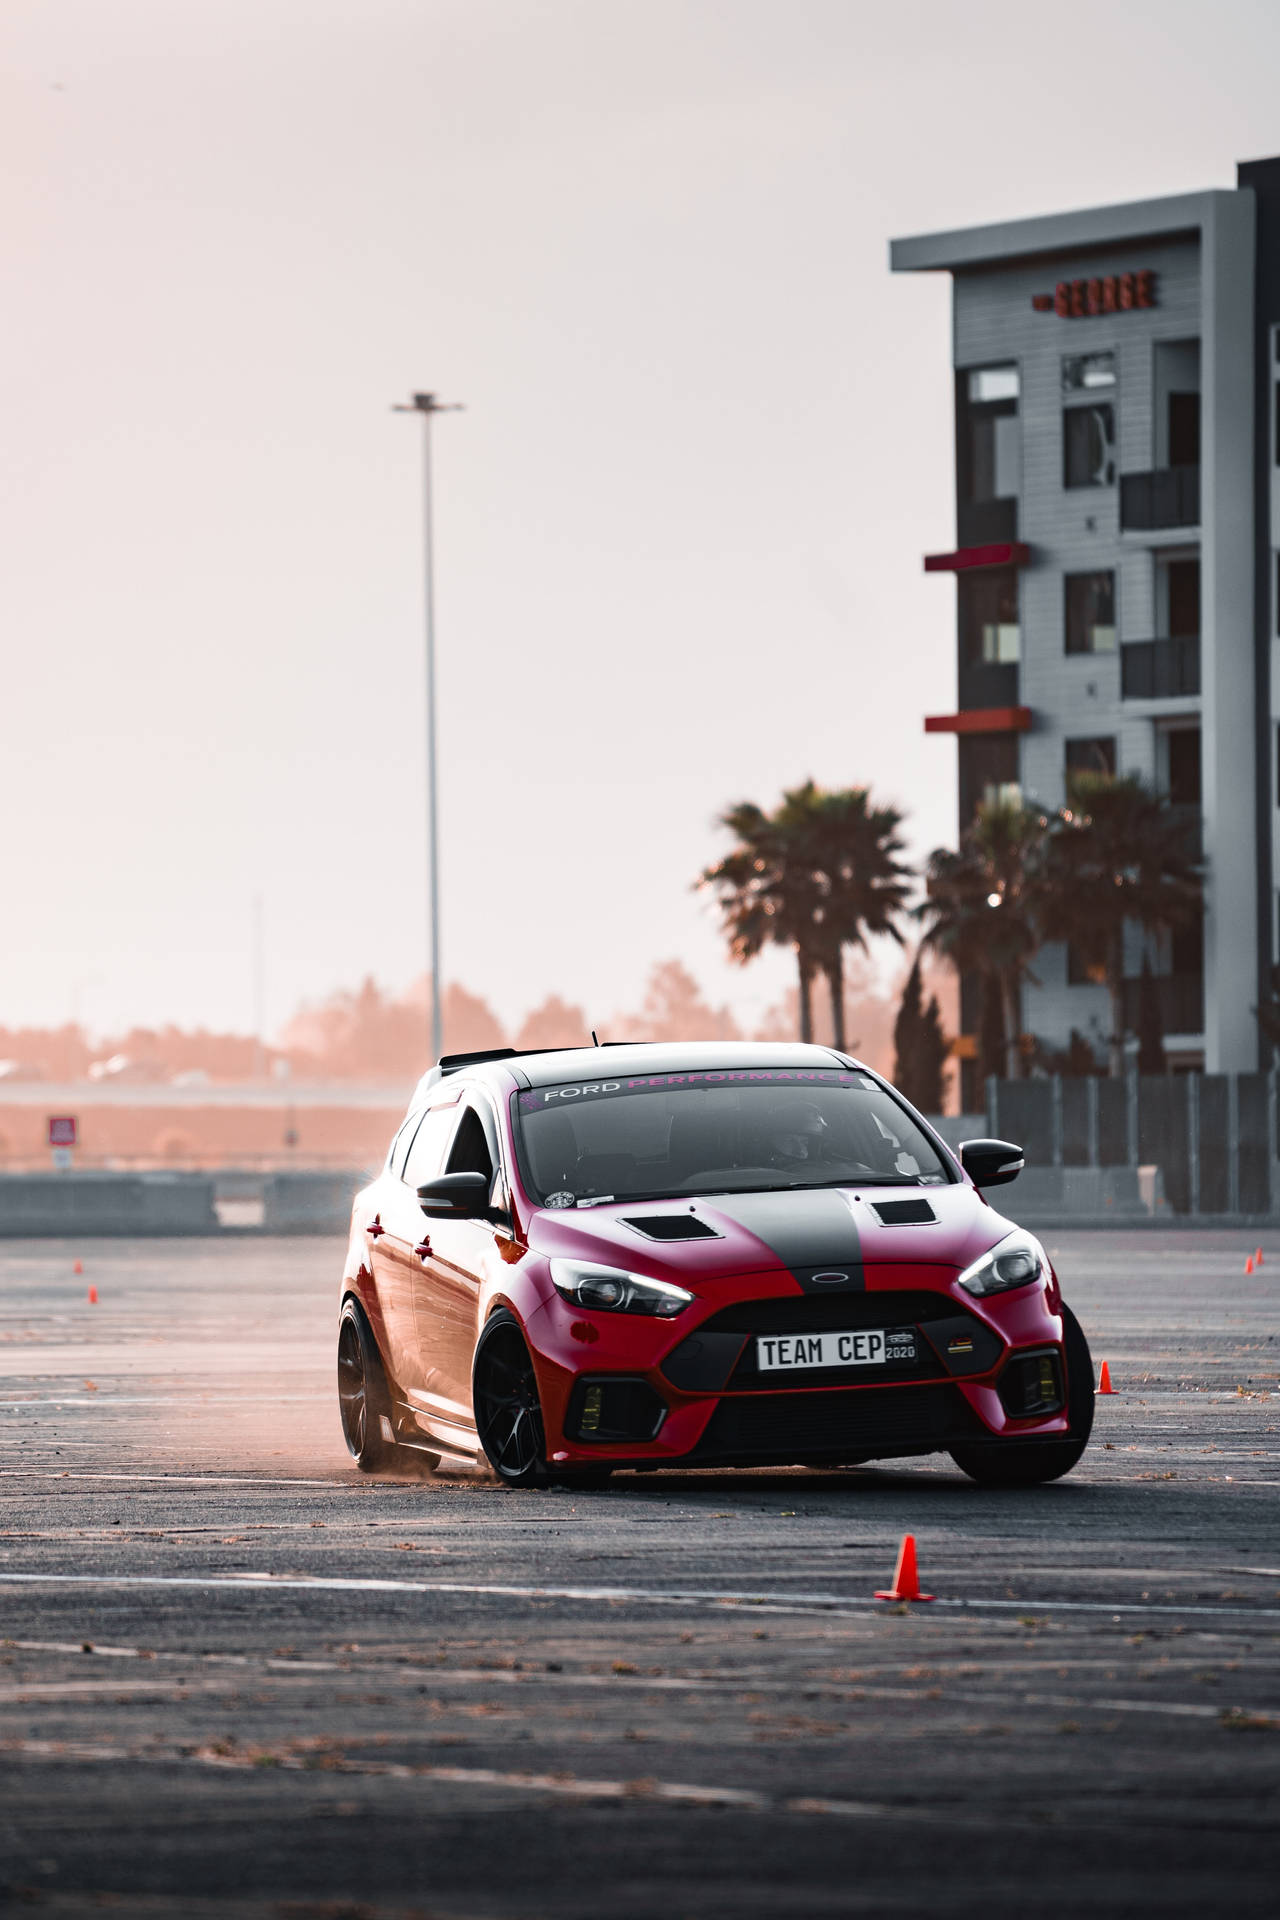 Maneuvering a Red Car in Action Wallpaper